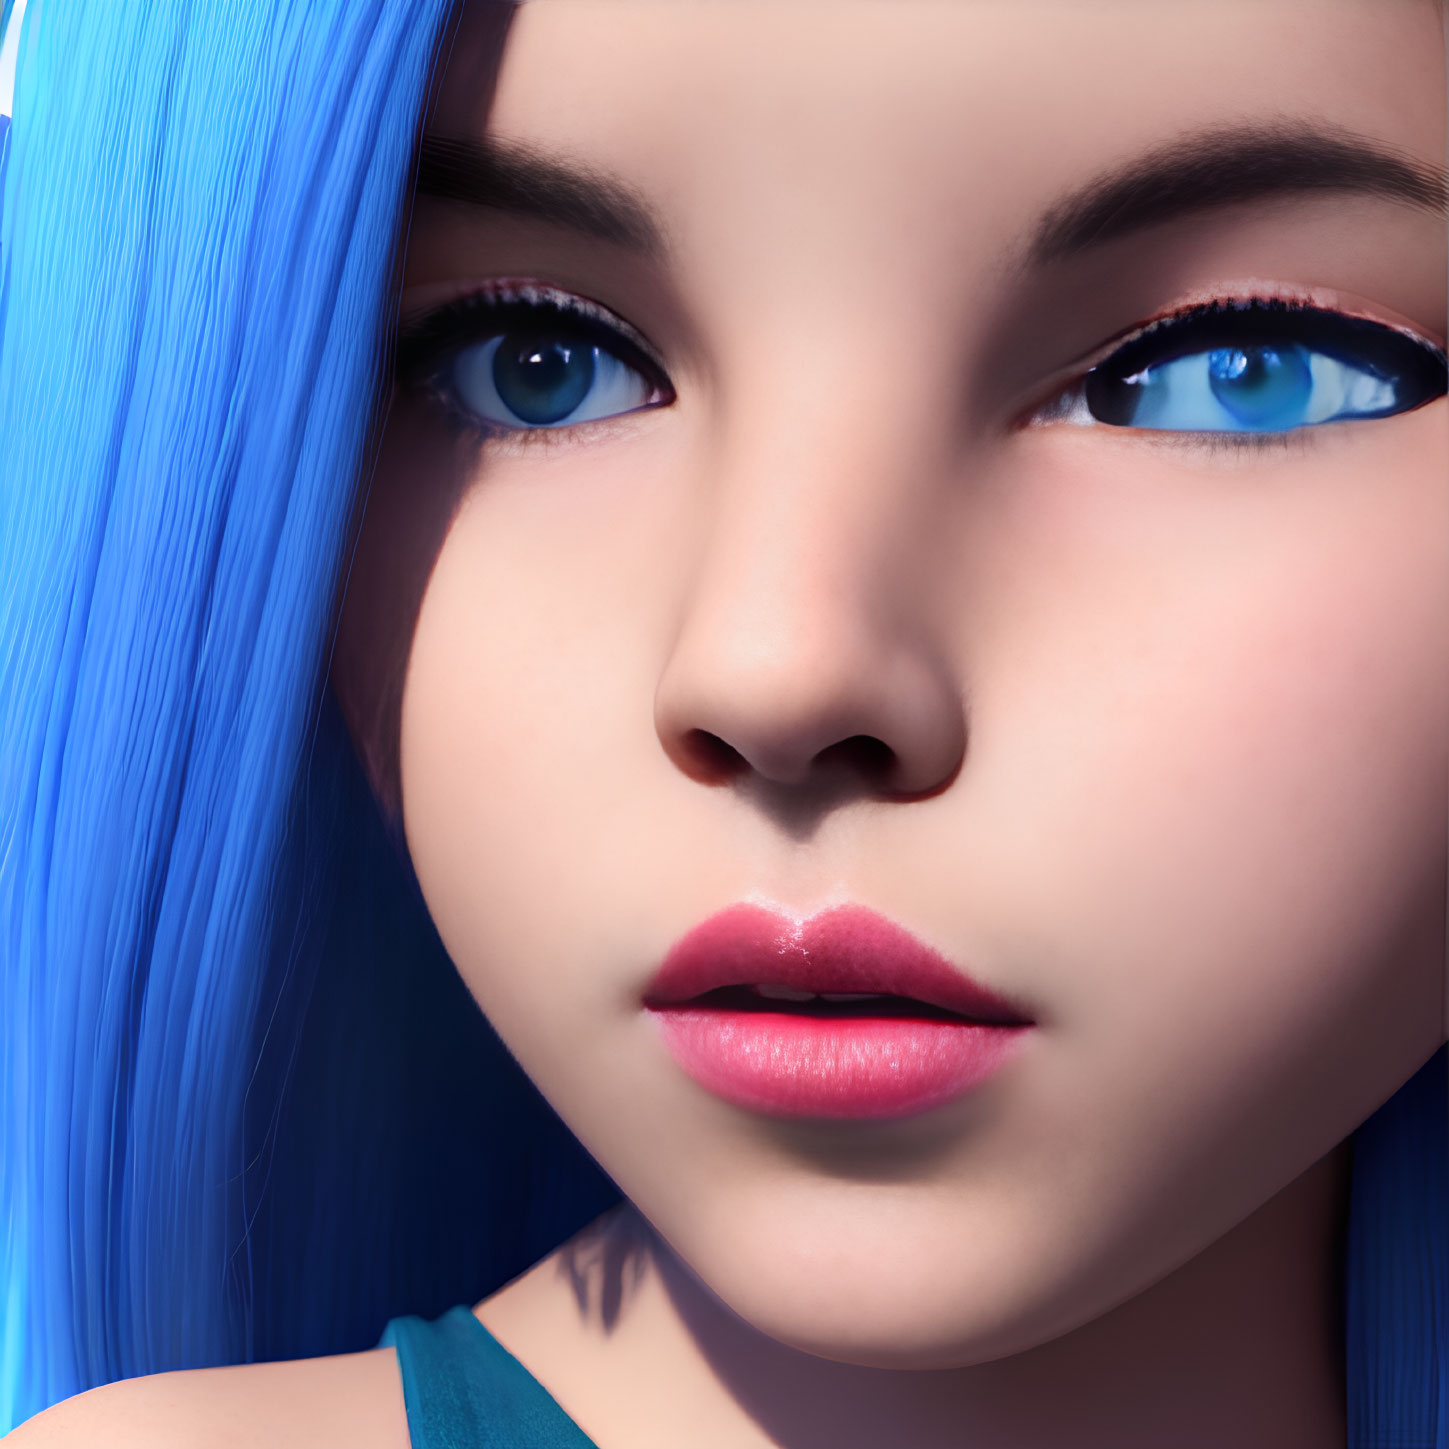 3D-rendered female character with blue hair and pink lips